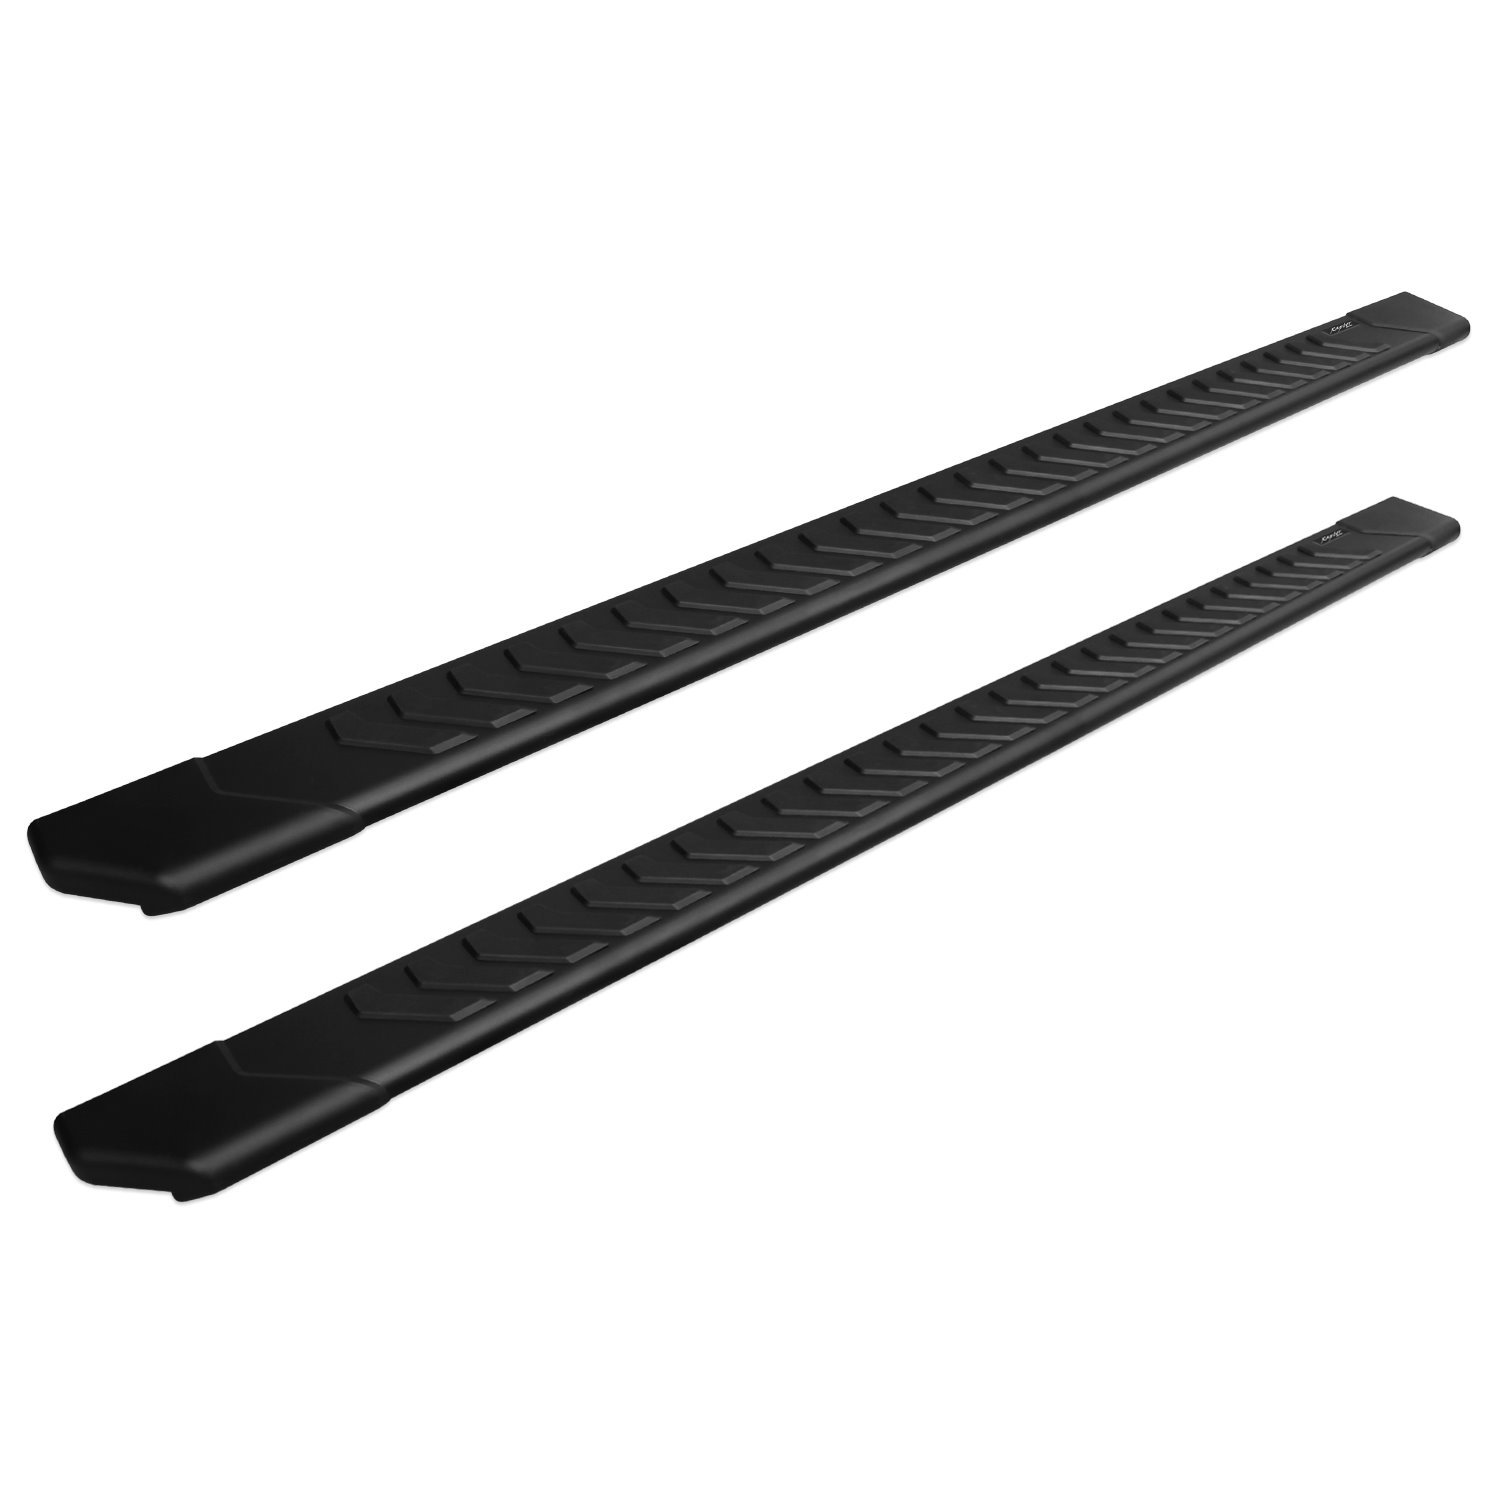 2204-0142BT 5 in OEM Style Full Tread Slide Track Running Boards, Black Aluminum, Fits Select Toyota Tundra CrewMax Cab